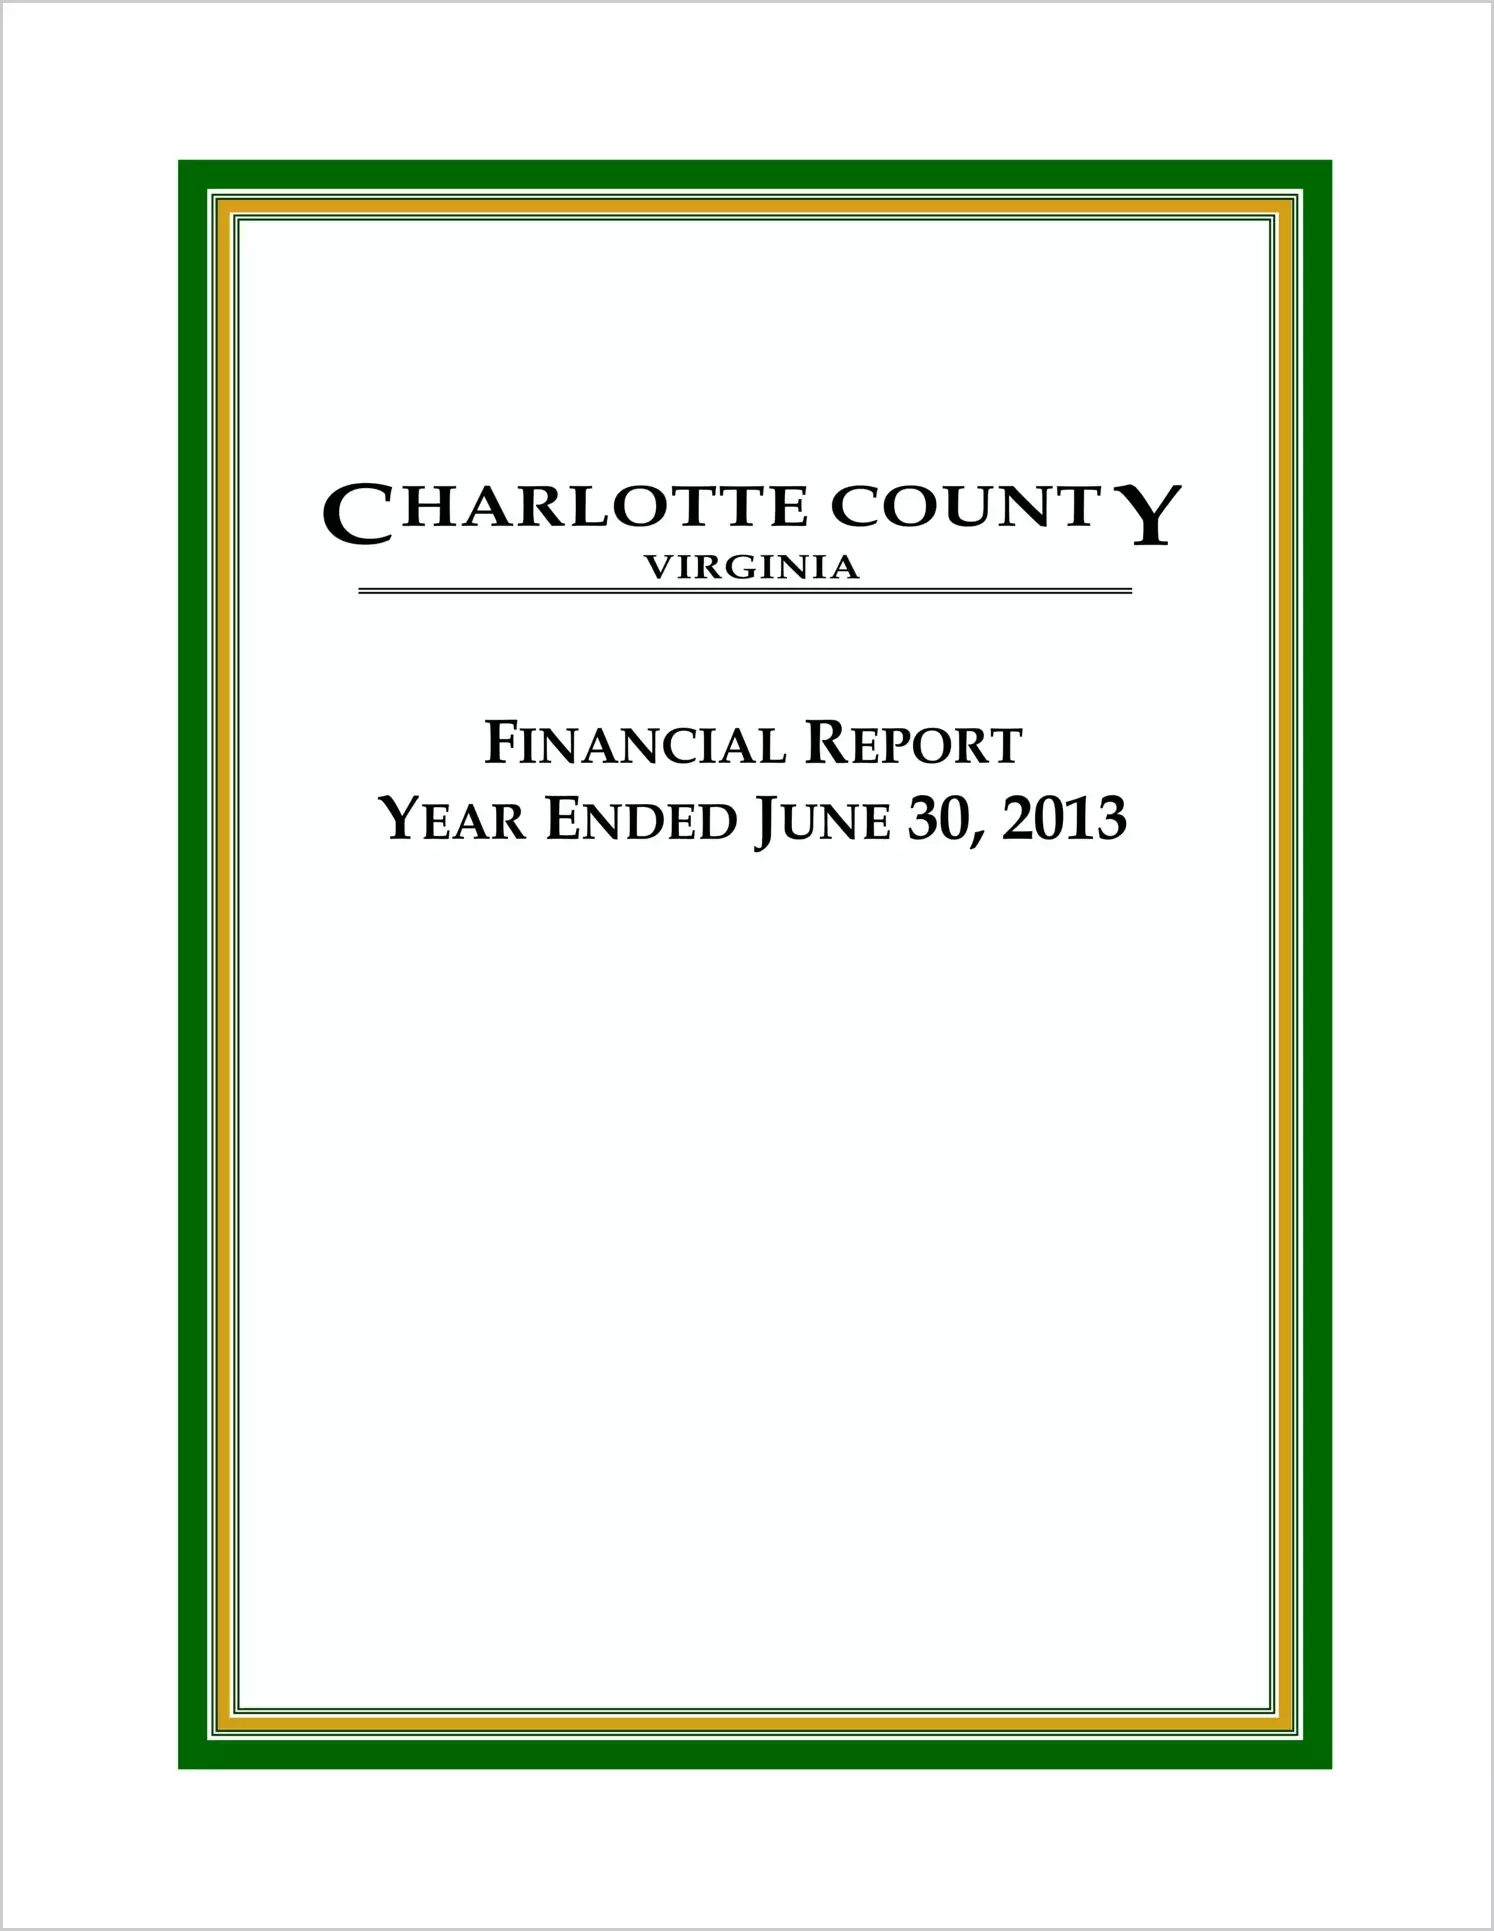 2013 Annual Financial Report for County of Charlotte